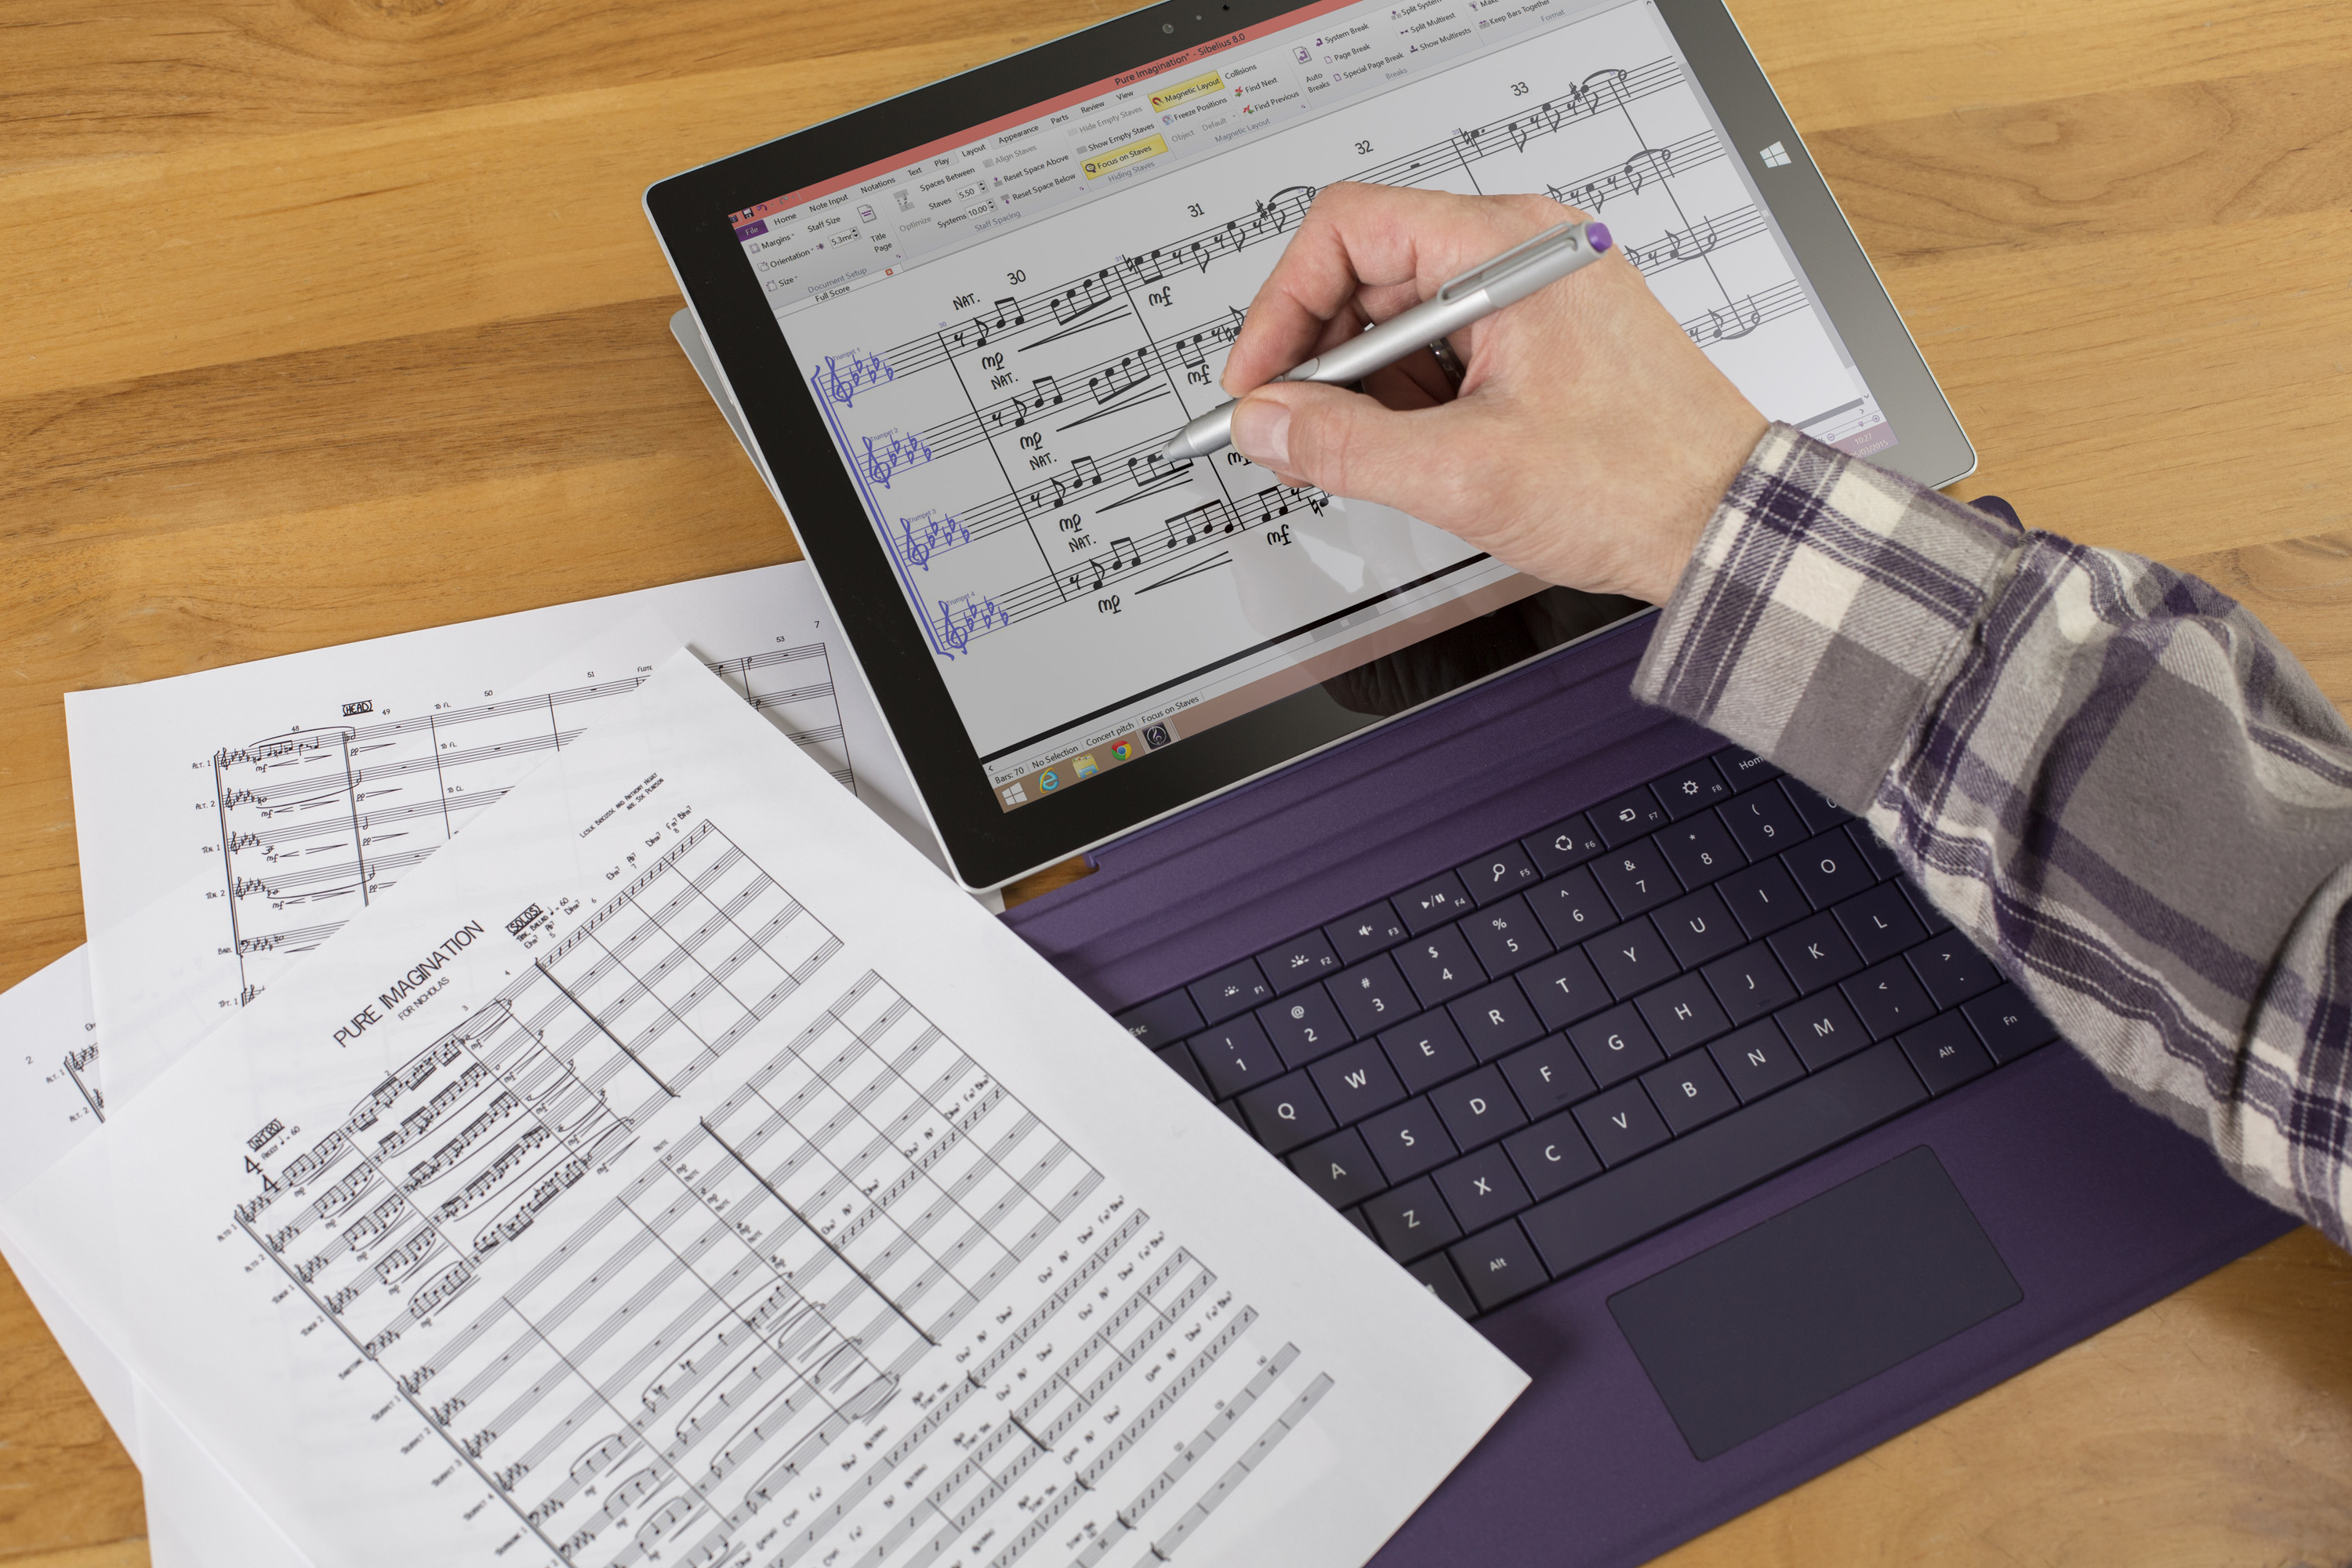 The New Sibelius Built For Surface Pro 3 Designed For